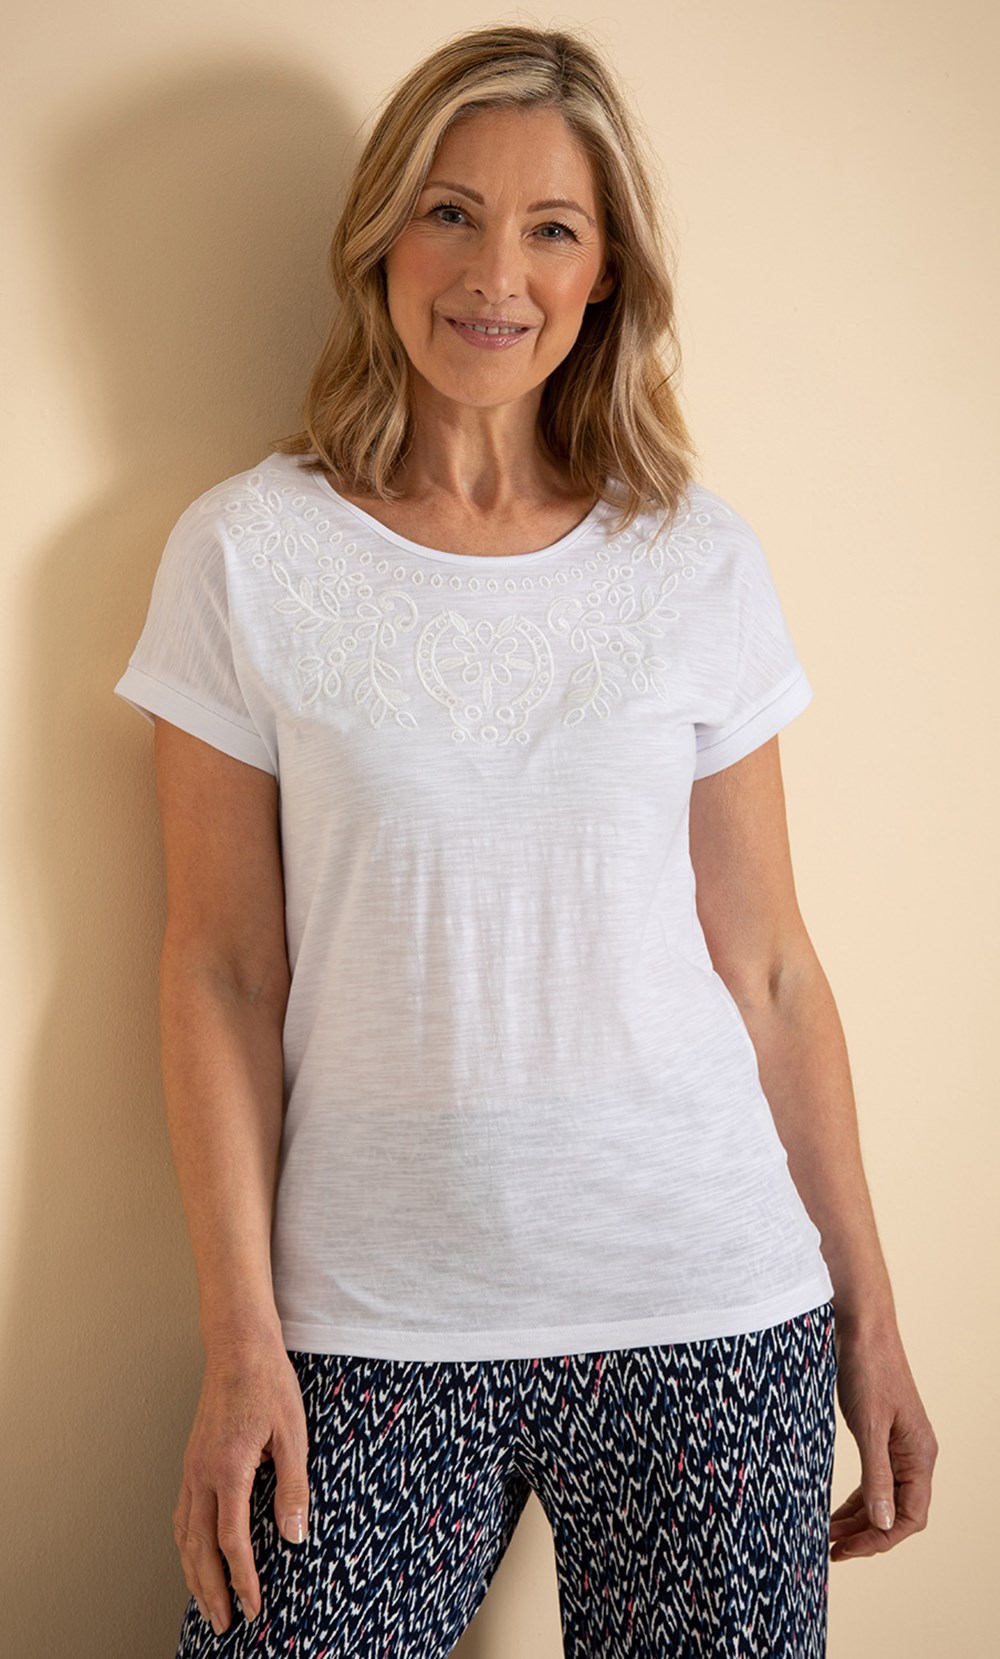 Anna Rose Embroidered Cotton Top